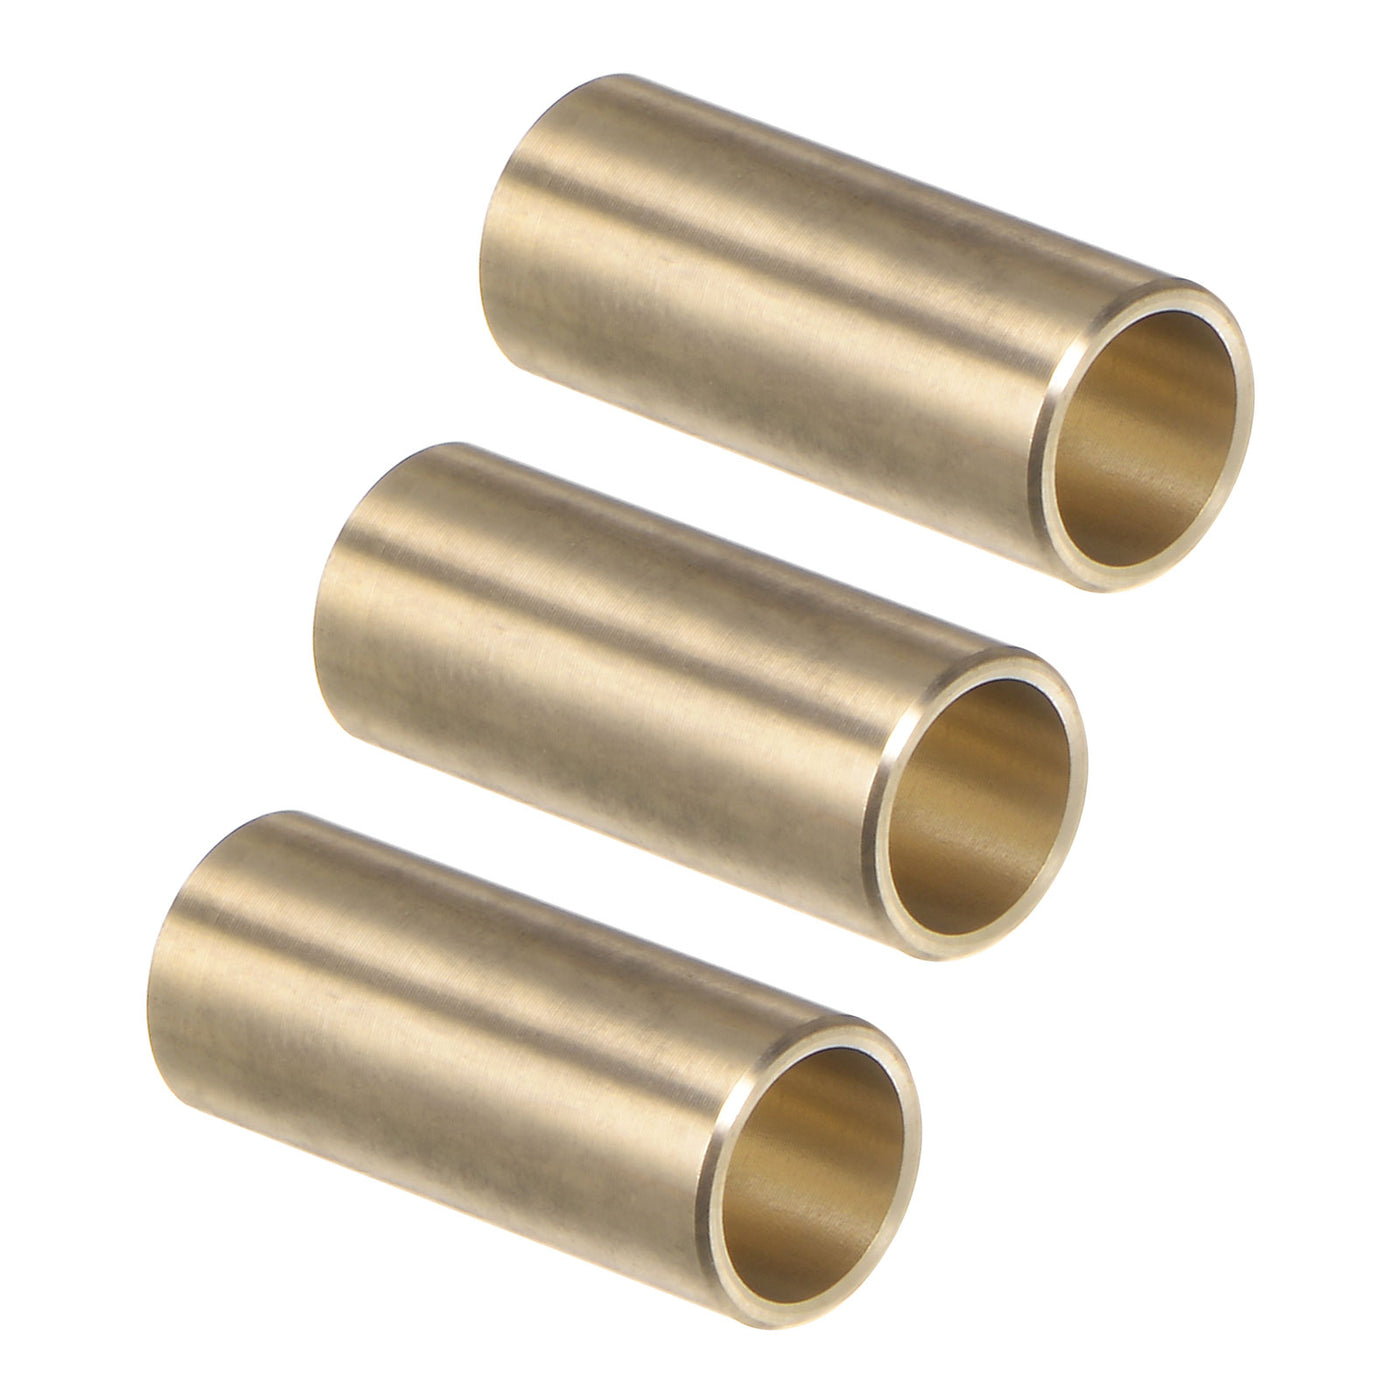 uxcell Uxcell 3pcs Sleeve Bearings 1/4" x 5/16" x 3/4" Wrapped Oilless Bushings Cast Brass